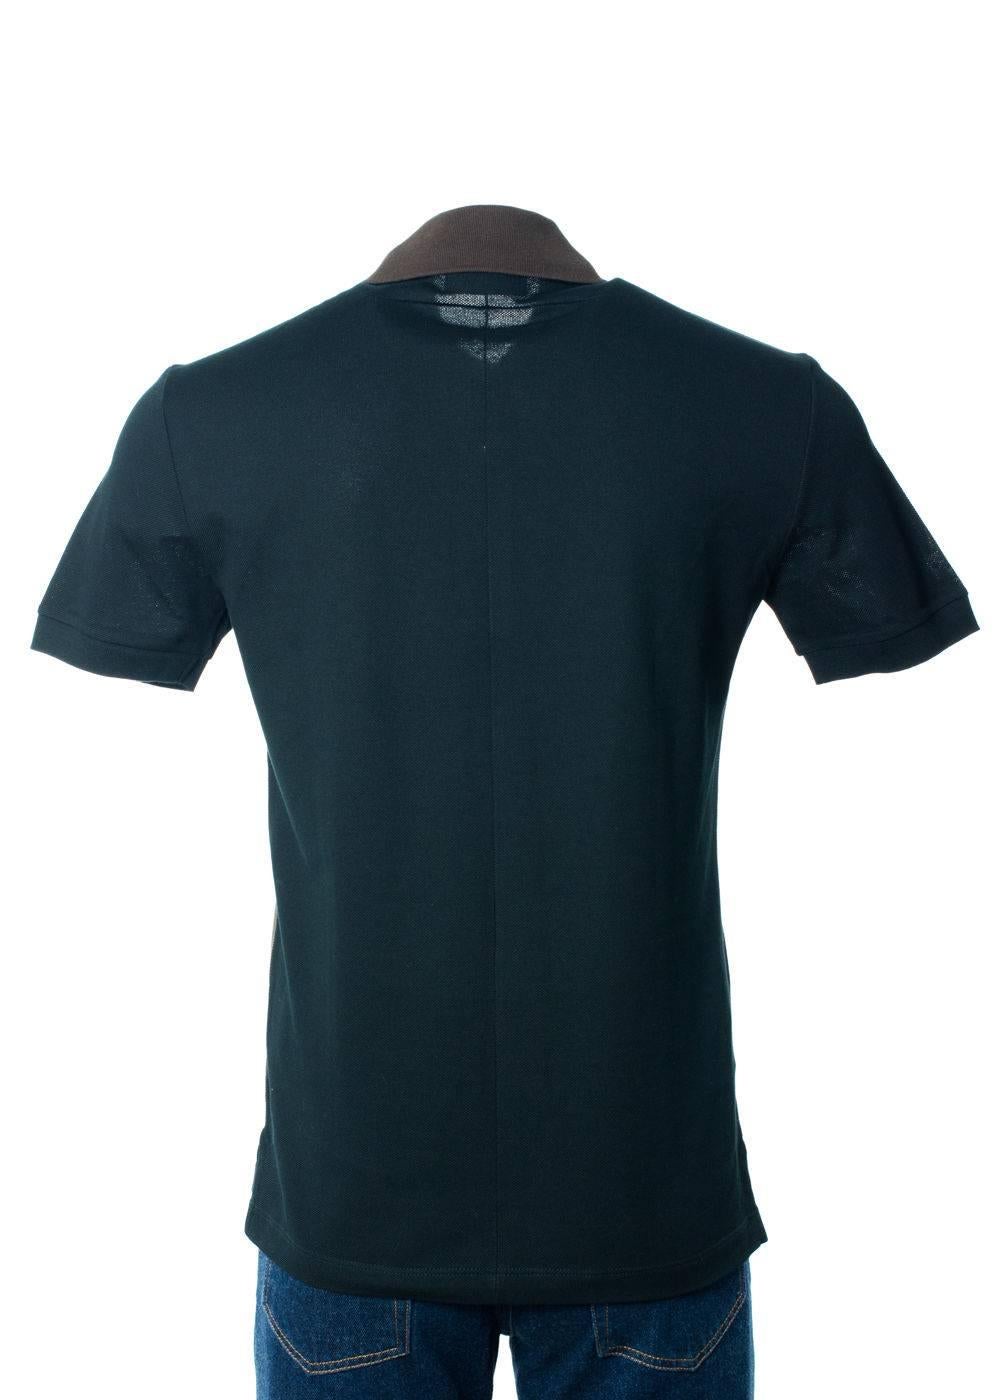 Brand New Givenchy Men's Polo
Original Tags
Retails in Stores & Online for $550
Men's Size Small Fits True to Size

Classic Black/Brown polo shirt, versatile for any occasion and season especially this hot summer weather. This polo shirt has a